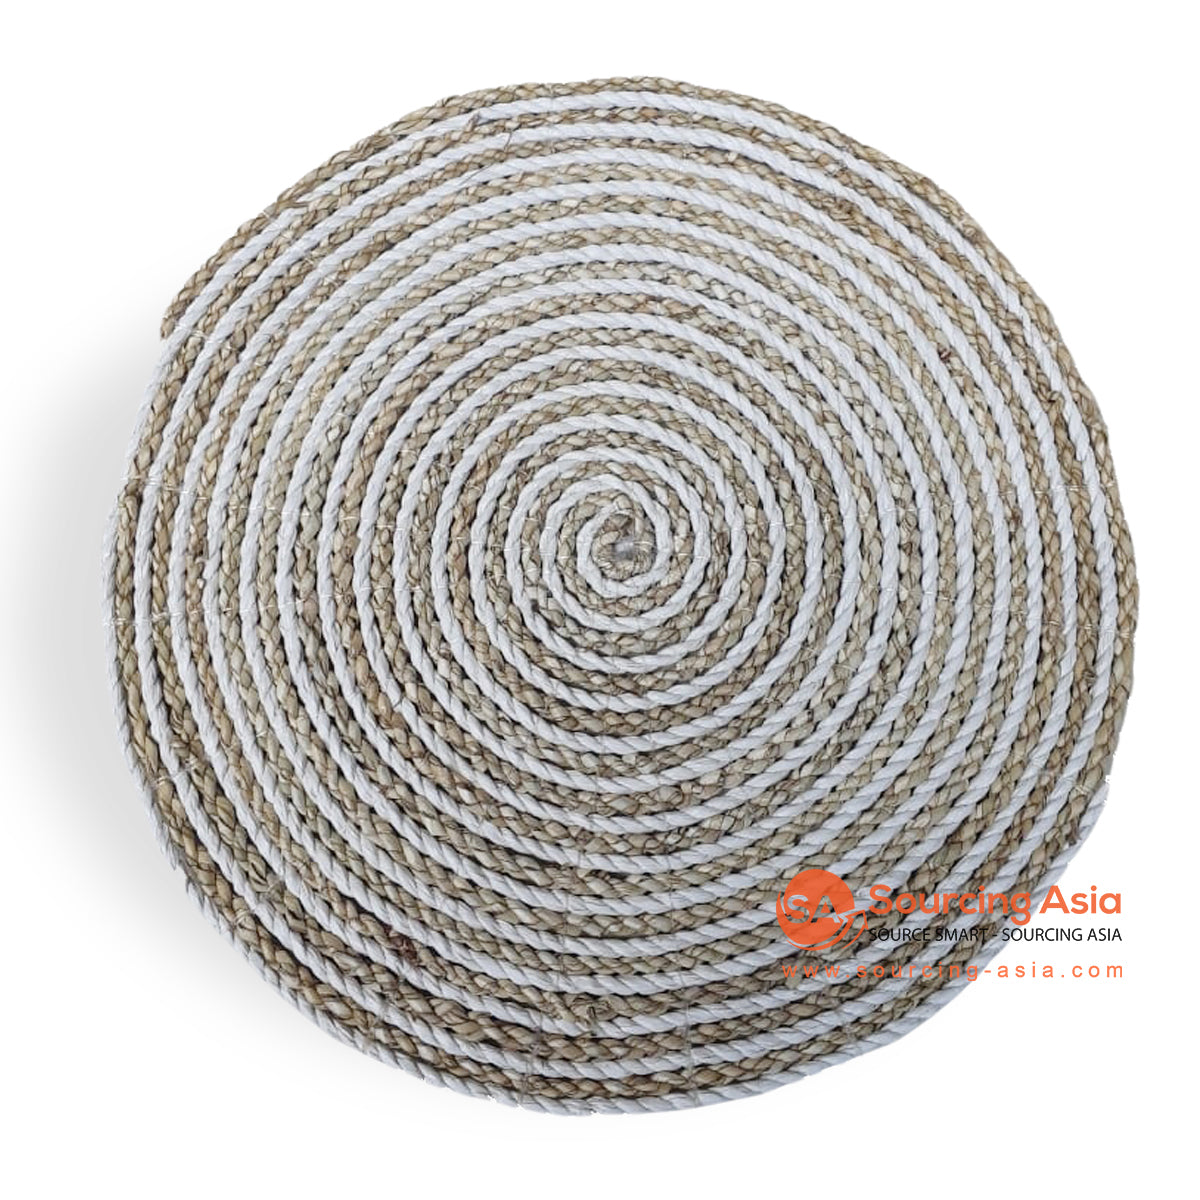 HBS070 WHITE AND NATURAL ROUND SEAGRASS PLACEMAT